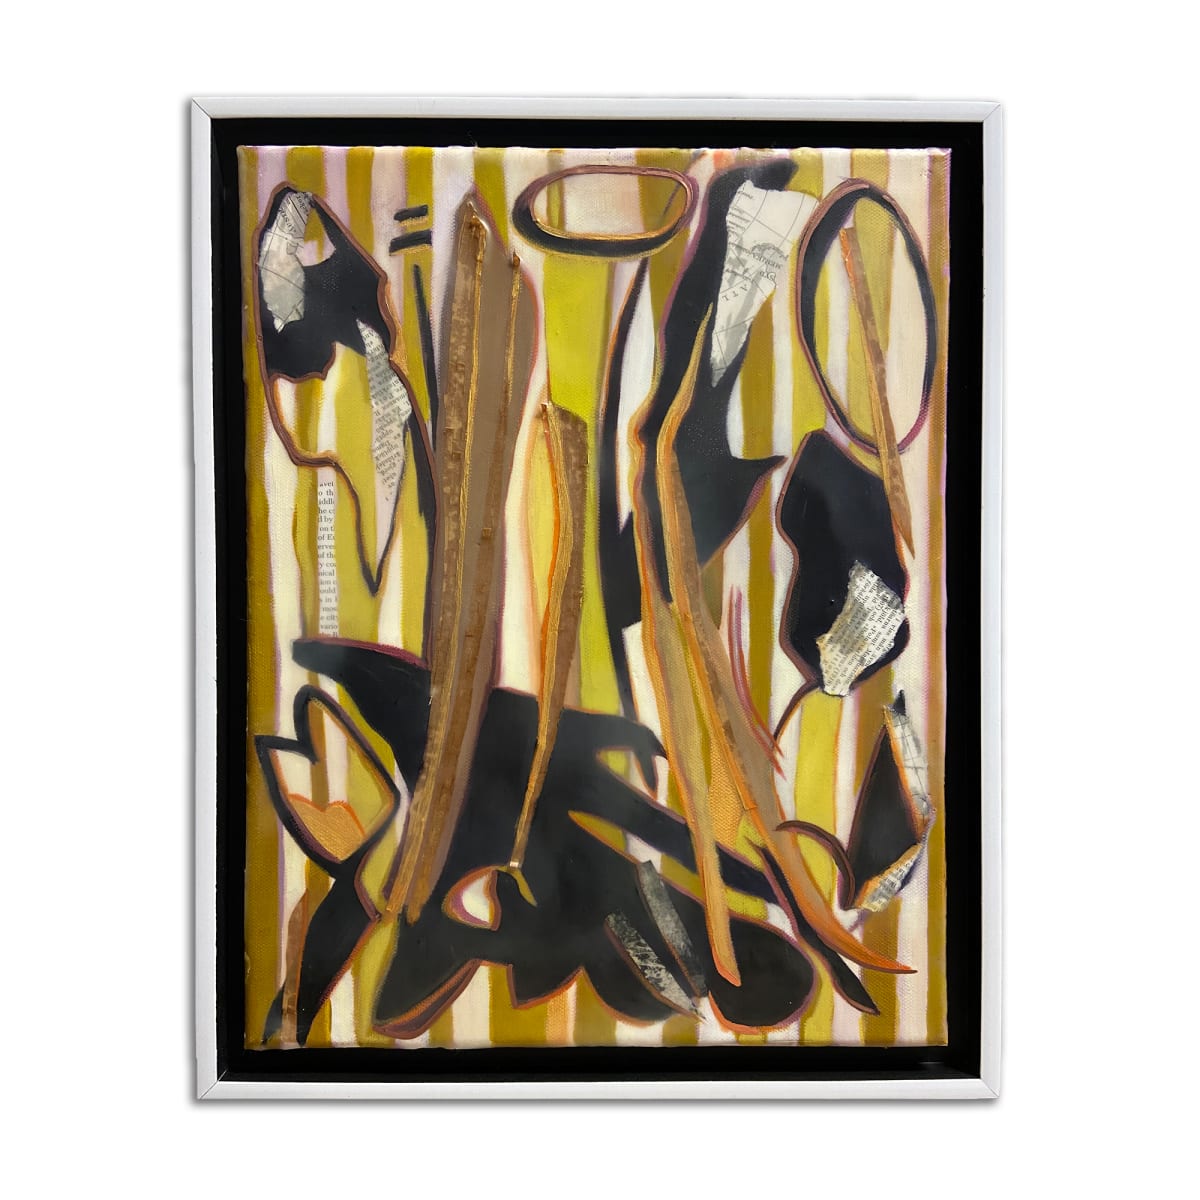 Brushfire: After Lee Krasner's Shooting Gold (1955) by Christie Snelson 